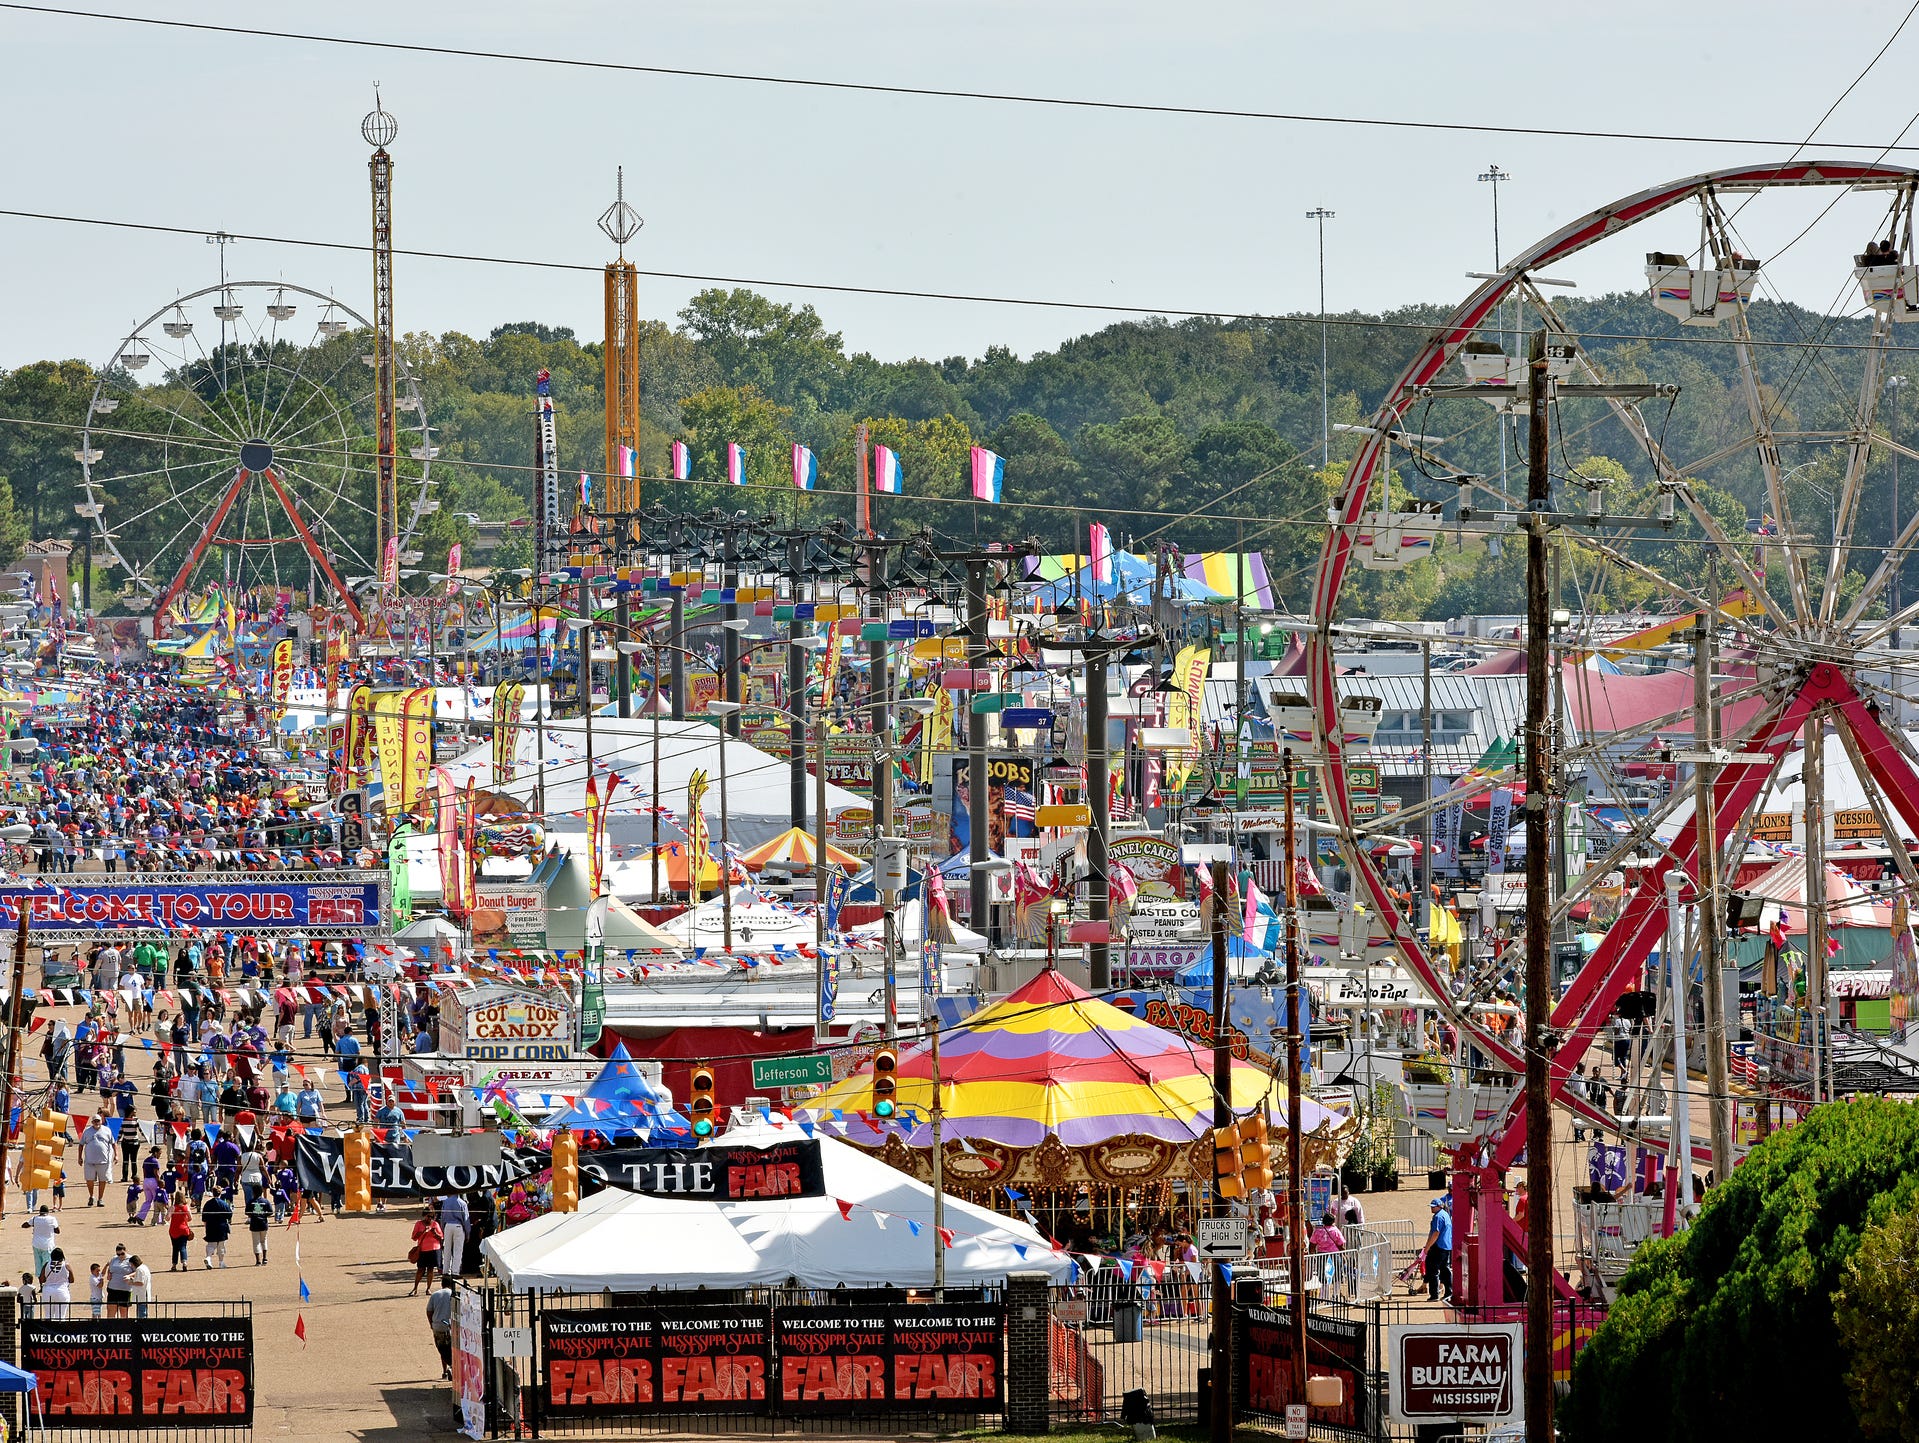 Mississippi State Fair sets attendance record